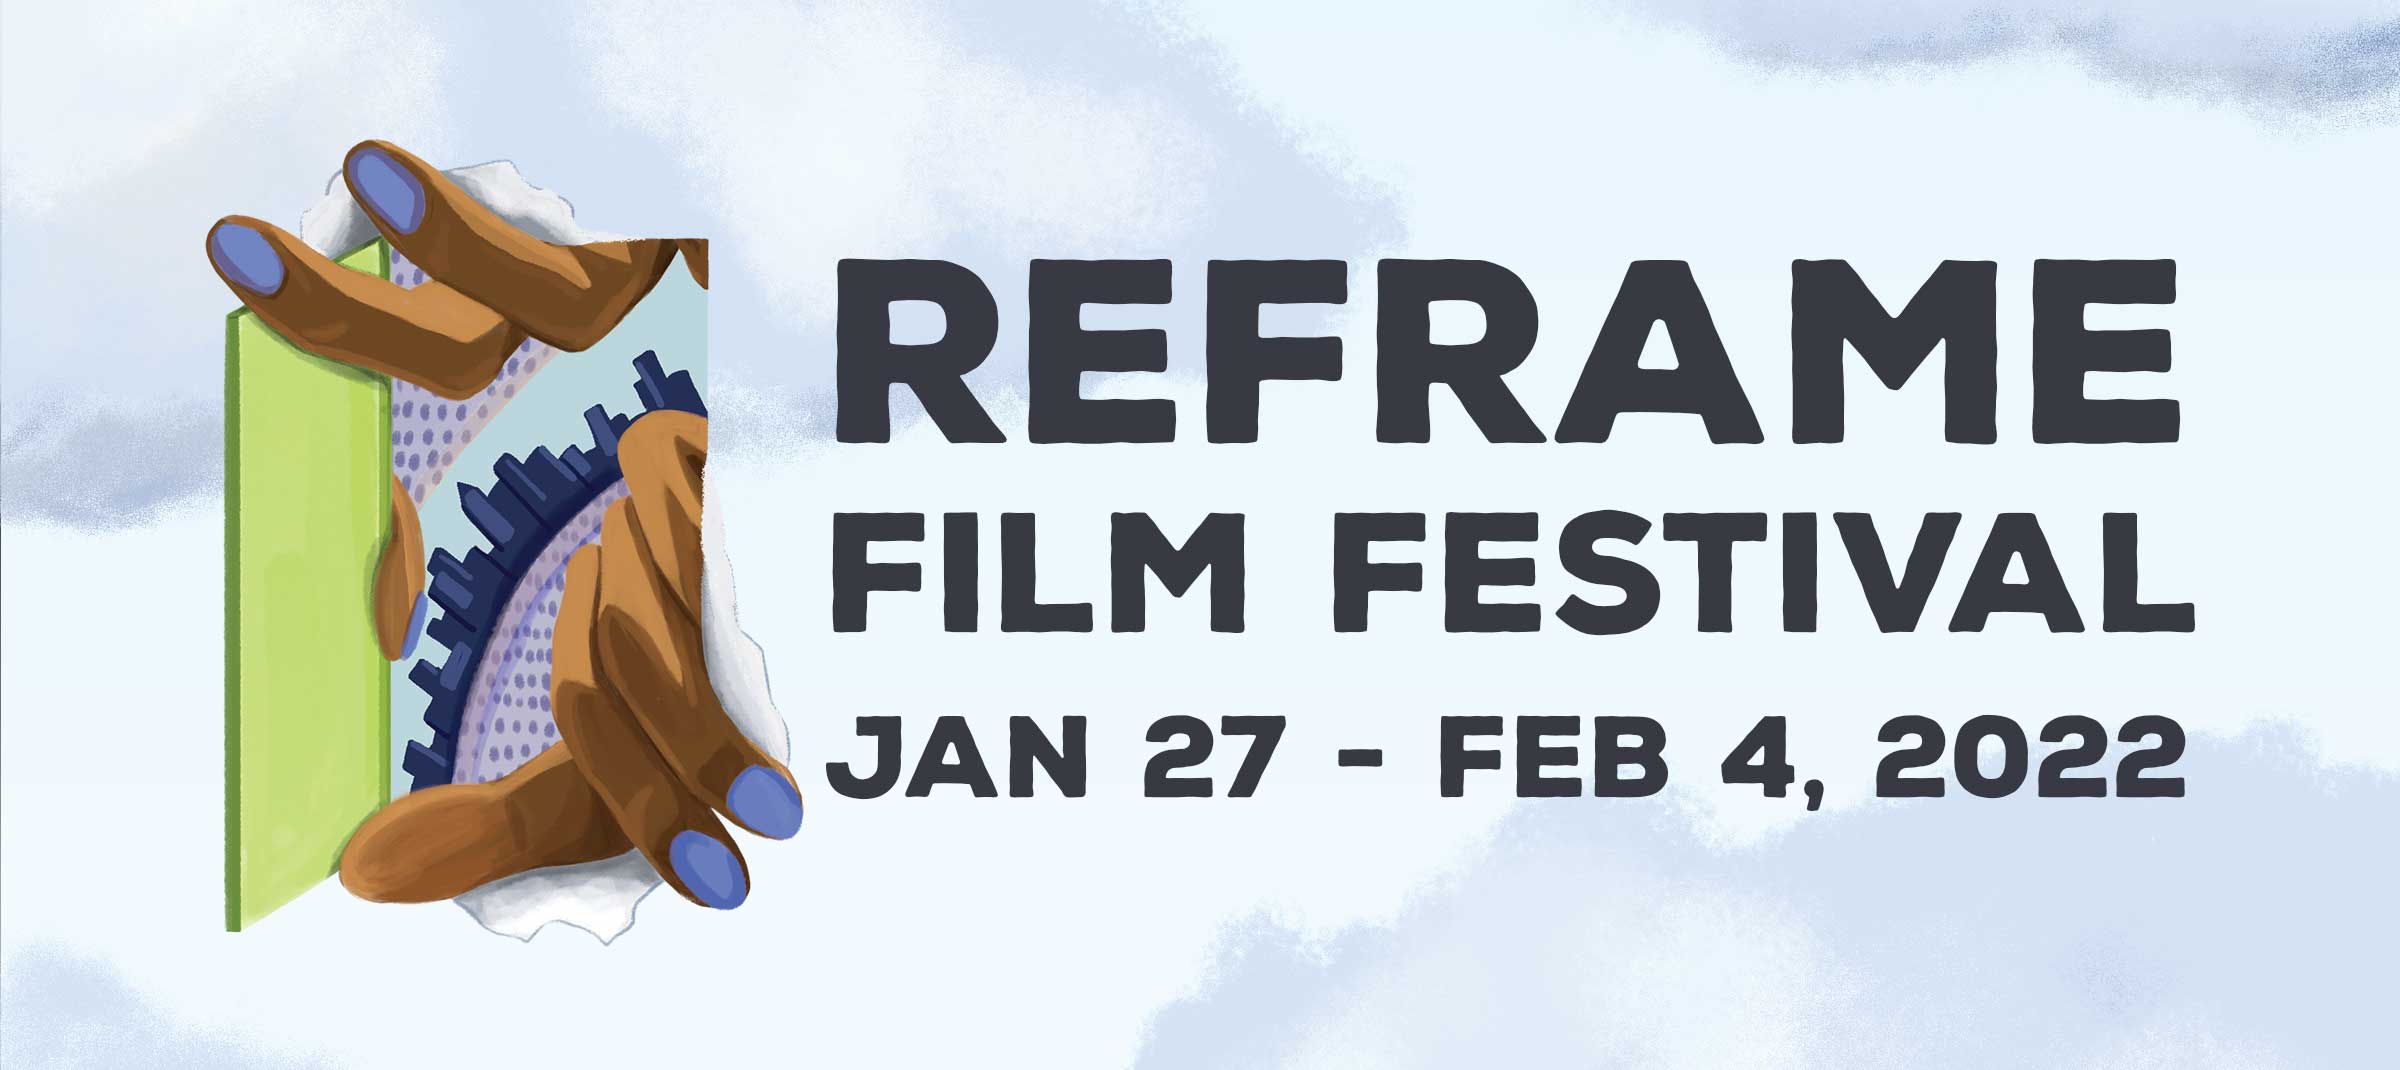 Illustration of an open green door set against a light blue cloudy background. Two hands are ripping through the door to show a cityscape. The text "ReFrame Film Festival Jan 27-Feb 4, 2022" appears to the right.